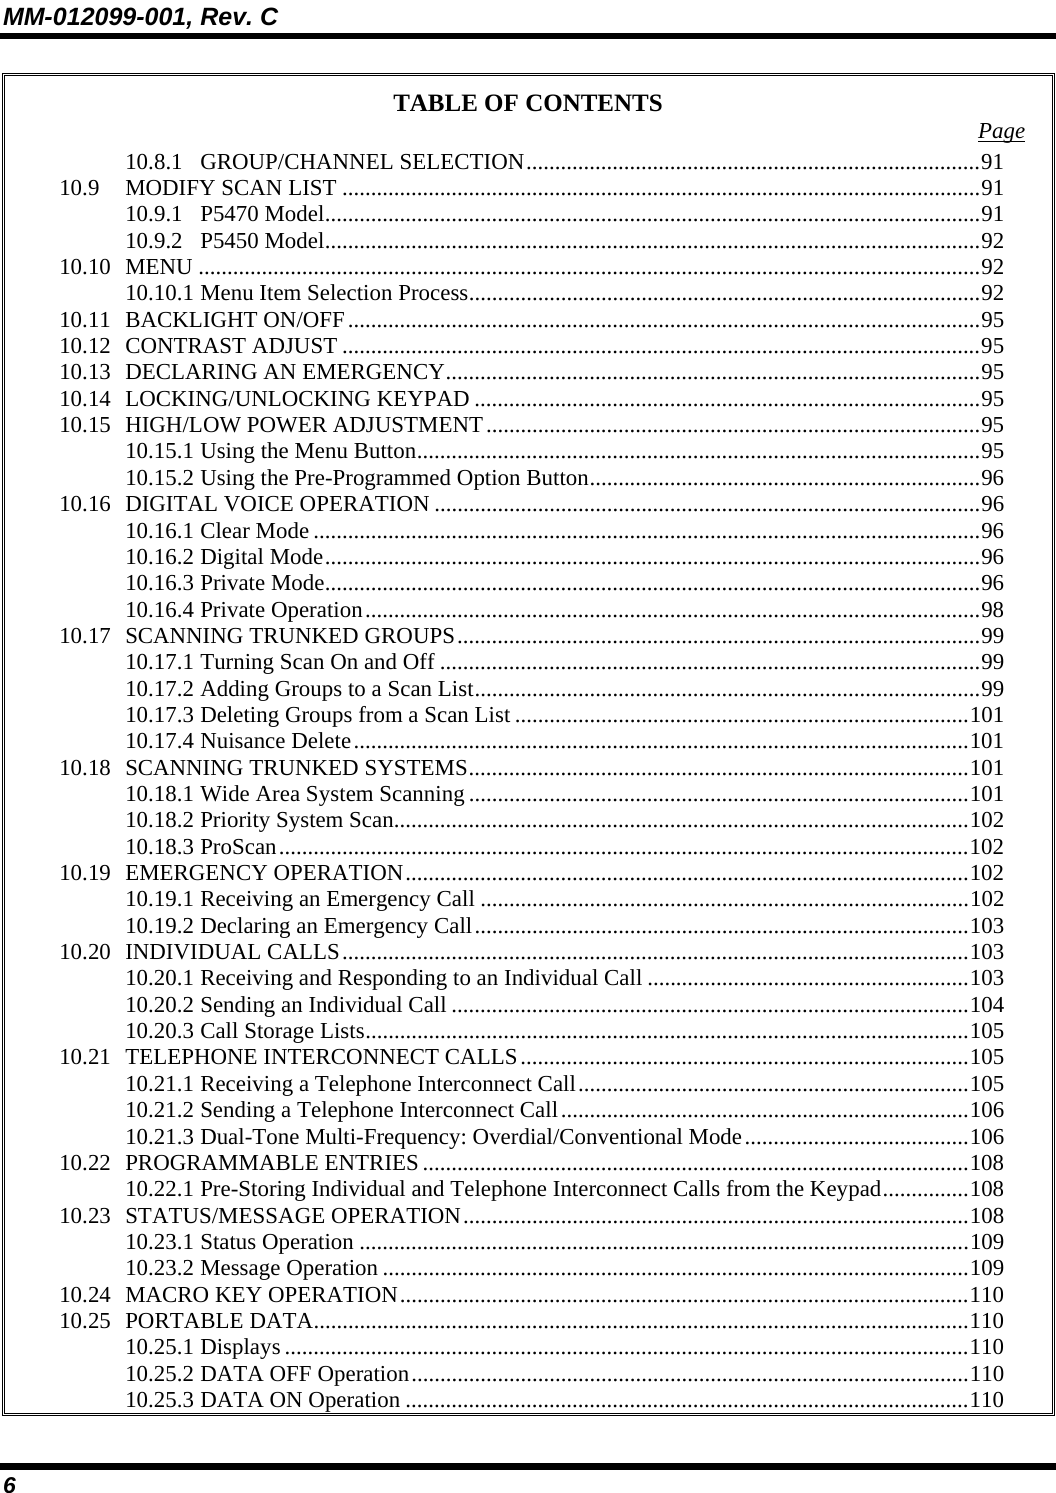 MM-012099-001, Rev. C 6 TABLE OF CONTENTS  Page 10.8.1 GROUP/CHANNEL SELECTION...............................................................................91 10.9 MODIFY SCAN LIST ...............................................................................................................91 10.9.1 P5470 Model..................................................................................................................91 10.9.2 P5450 Model..................................................................................................................92 10.10 MENU ........................................................................................................................................92 10.10.1 Menu Item Selection Process.........................................................................................92 10.11 BACKLIGHT ON/OFF..............................................................................................................95 10.12 CONTRAST ADJUST ...............................................................................................................95 10.13 DECLARING AN EMERGENCY.............................................................................................95 10.14 LOCKING/UNLOCKING KEYPAD ........................................................................................95 10.15 HIGH/LOW POWER ADJUSTMENT......................................................................................95 10.15.1 Using the Menu Button..................................................................................................95 10.15.2 Using the Pre-Programmed Option Button....................................................................96 10.16 DIGITAL VOICE OPERATION ...............................................................................................96 10.16.1 Clear Mode ....................................................................................................................96 10.16.2 Digital Mode..................................................................................................................96 10.16.3 Private Mode..................................................................................................................96 10.16.4 Private Operation...........................................................................................................98 10.17 SCANNING TRUNKED GROUPS...........................................................................................99 10.17.1 Turning Scan On and Off ..............................................................................................99 10.17.2 Adding Groups to a Scan List........................................................................................99 10.17.3 Deleting Groups from a Scan List ...............................................................................101 10.17.4 Nuisance Delete...........................................................................................................101 10.18 SCANNING TRUNKED SYSTEMS.......................................................................................101 10.18.1 Wide Area System Scanning .......................................................................................101 10.18.2 Priority System Scan....................................................................................................102 10.18.3 ProScan........................................................................................................................102 10.19 EMERGENCY OPERATION..................................................................................................102 10.19.1 Receiving an Emergency Call .....................................................................................102 10.19.2 Declaring an Emergency Call......................................................................................103 10.20 INDIVIDUAL CALLS.............................................................................................................103 10.20.1 Receiving and Responding to an Individual Call ........................................................103 10.20.2 Sending an Individual Call ..........................................................................................104 10.20.3 Call Storage Lists.........................................................................................................105 10.21 TELEPHONE INTERCONNECT CALLS..............................................................................105 10.21.1 Receiving a Telephone Interconnect Call....................................................................105 10.21.2 Sending a Telephone Interconnect Call.......................................................................106 10.21.3 Dual-Tone Multi-Frequency: Overdial/Conventional Mode.......................................106 10.22 PROGRAMMABLE ENTRIES...............................................................................................108 10.22.1 Pre-Storing Individual and Telephone Interconnect Calls from the Keypad...............108 10.23 STATUS/MESSAGE OPERATION........................................................................................108 10.23.1 Status Operation ..........................................................................................................109 10.23.2 Message Operation ......................................................................................................109 10.24 MACRO KEY OPERATION...................................................................................................110 10.25 PORTABLE DATA..................................................................................................................110 10.25.1 Displays .......................................................................................................................110 10.25.2 DATA OFF Operation.................................................................................................110 10.25.3 DATA ON Operation ..................................................................................................110 